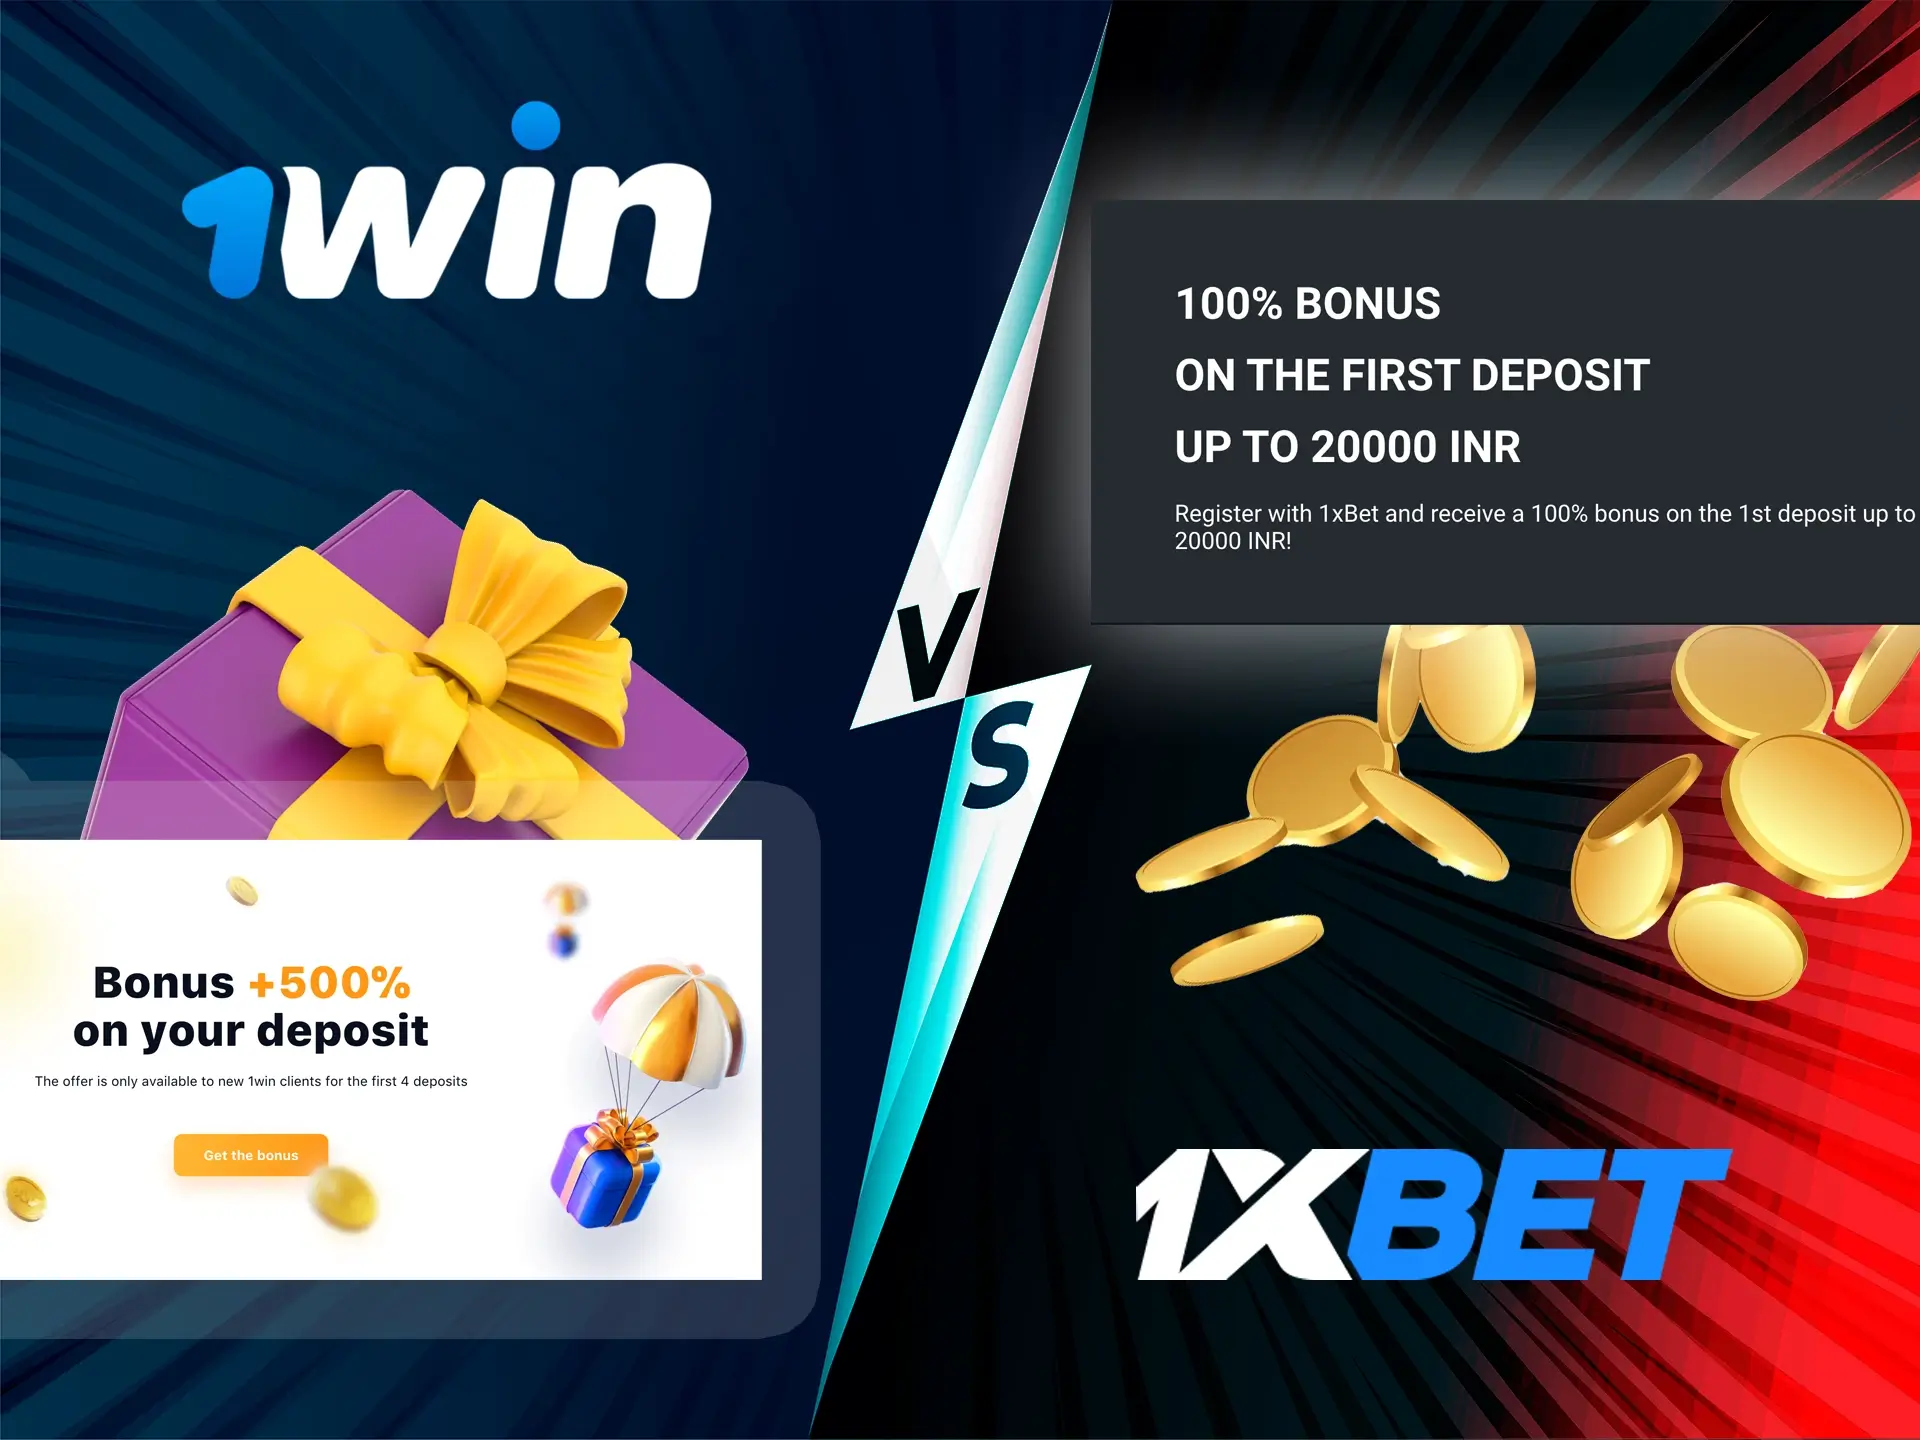 Try a welcome bonus from 1xbet or 1win.